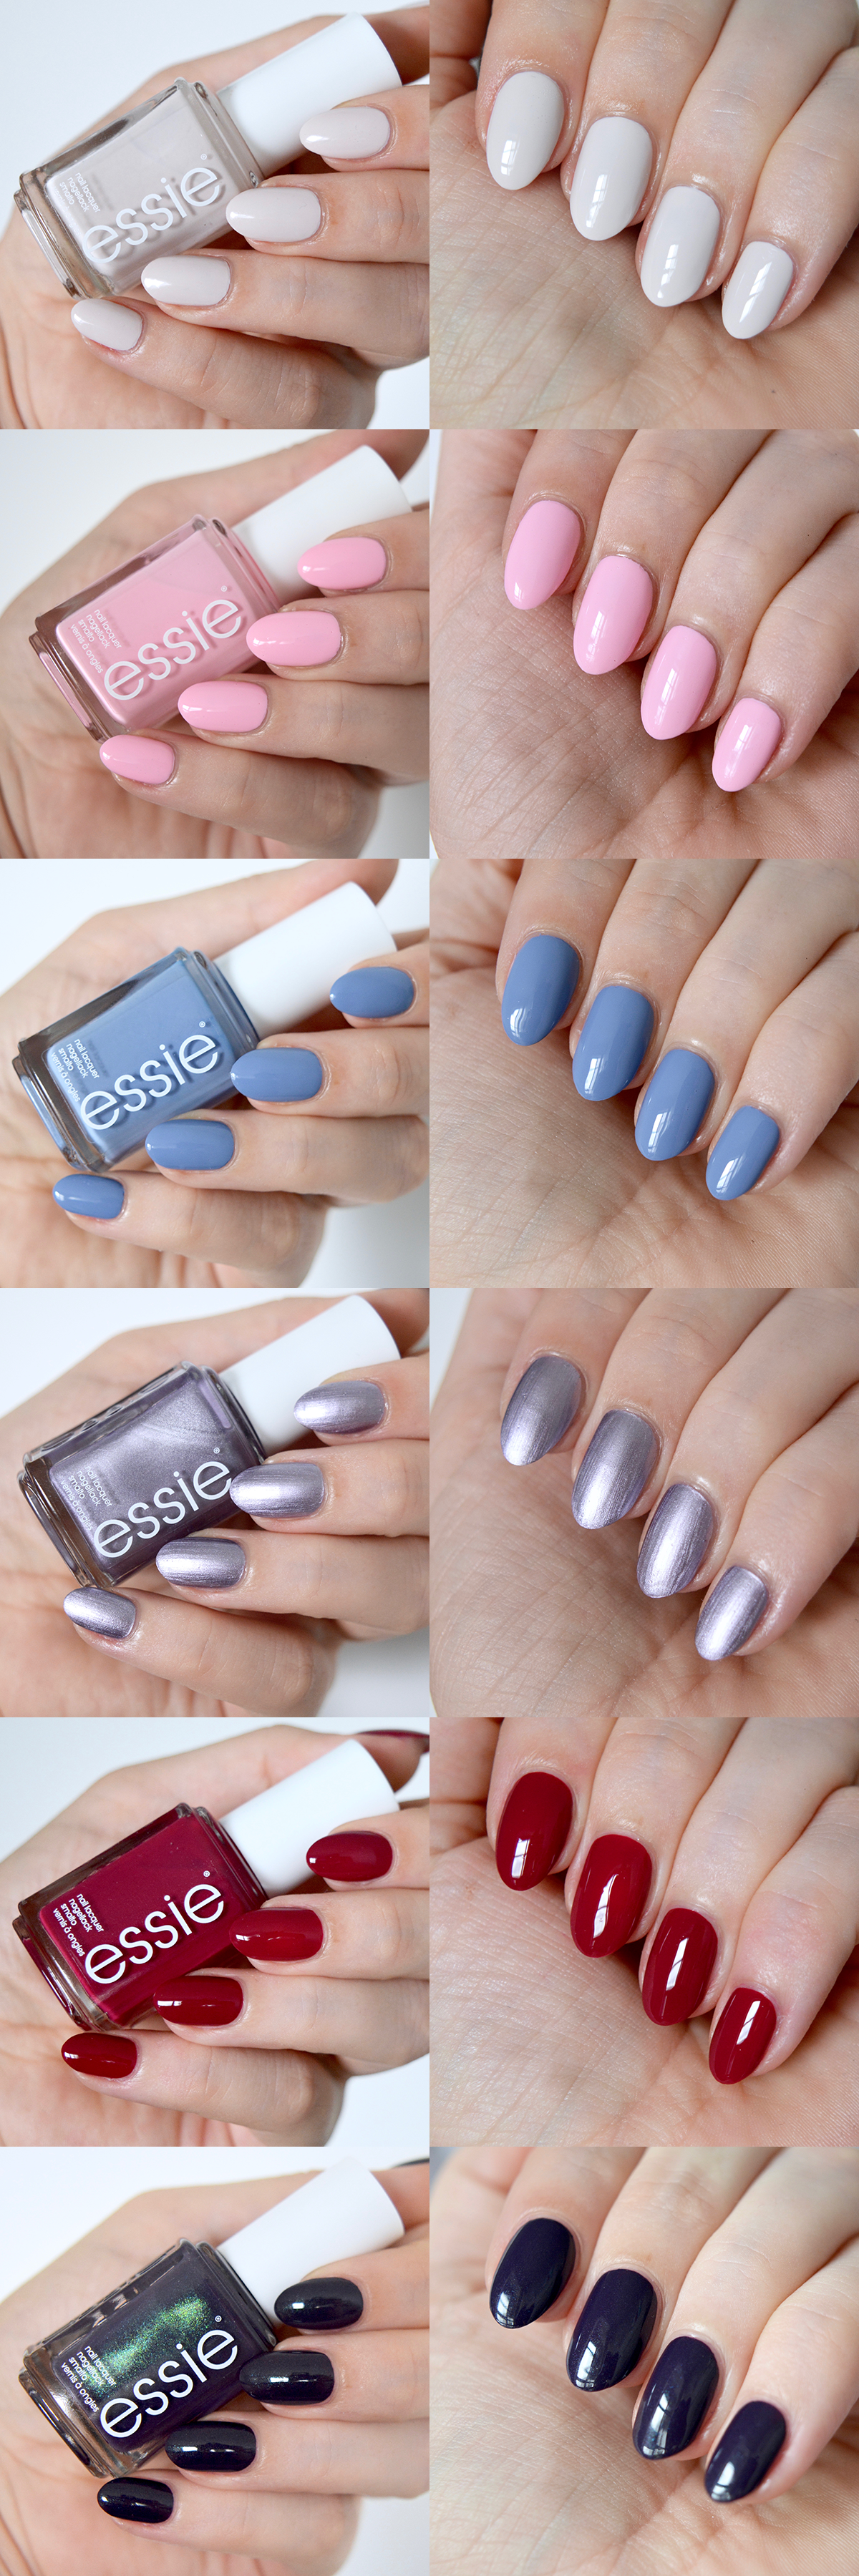 Essie Fall 2017 collection - nineties inspired!